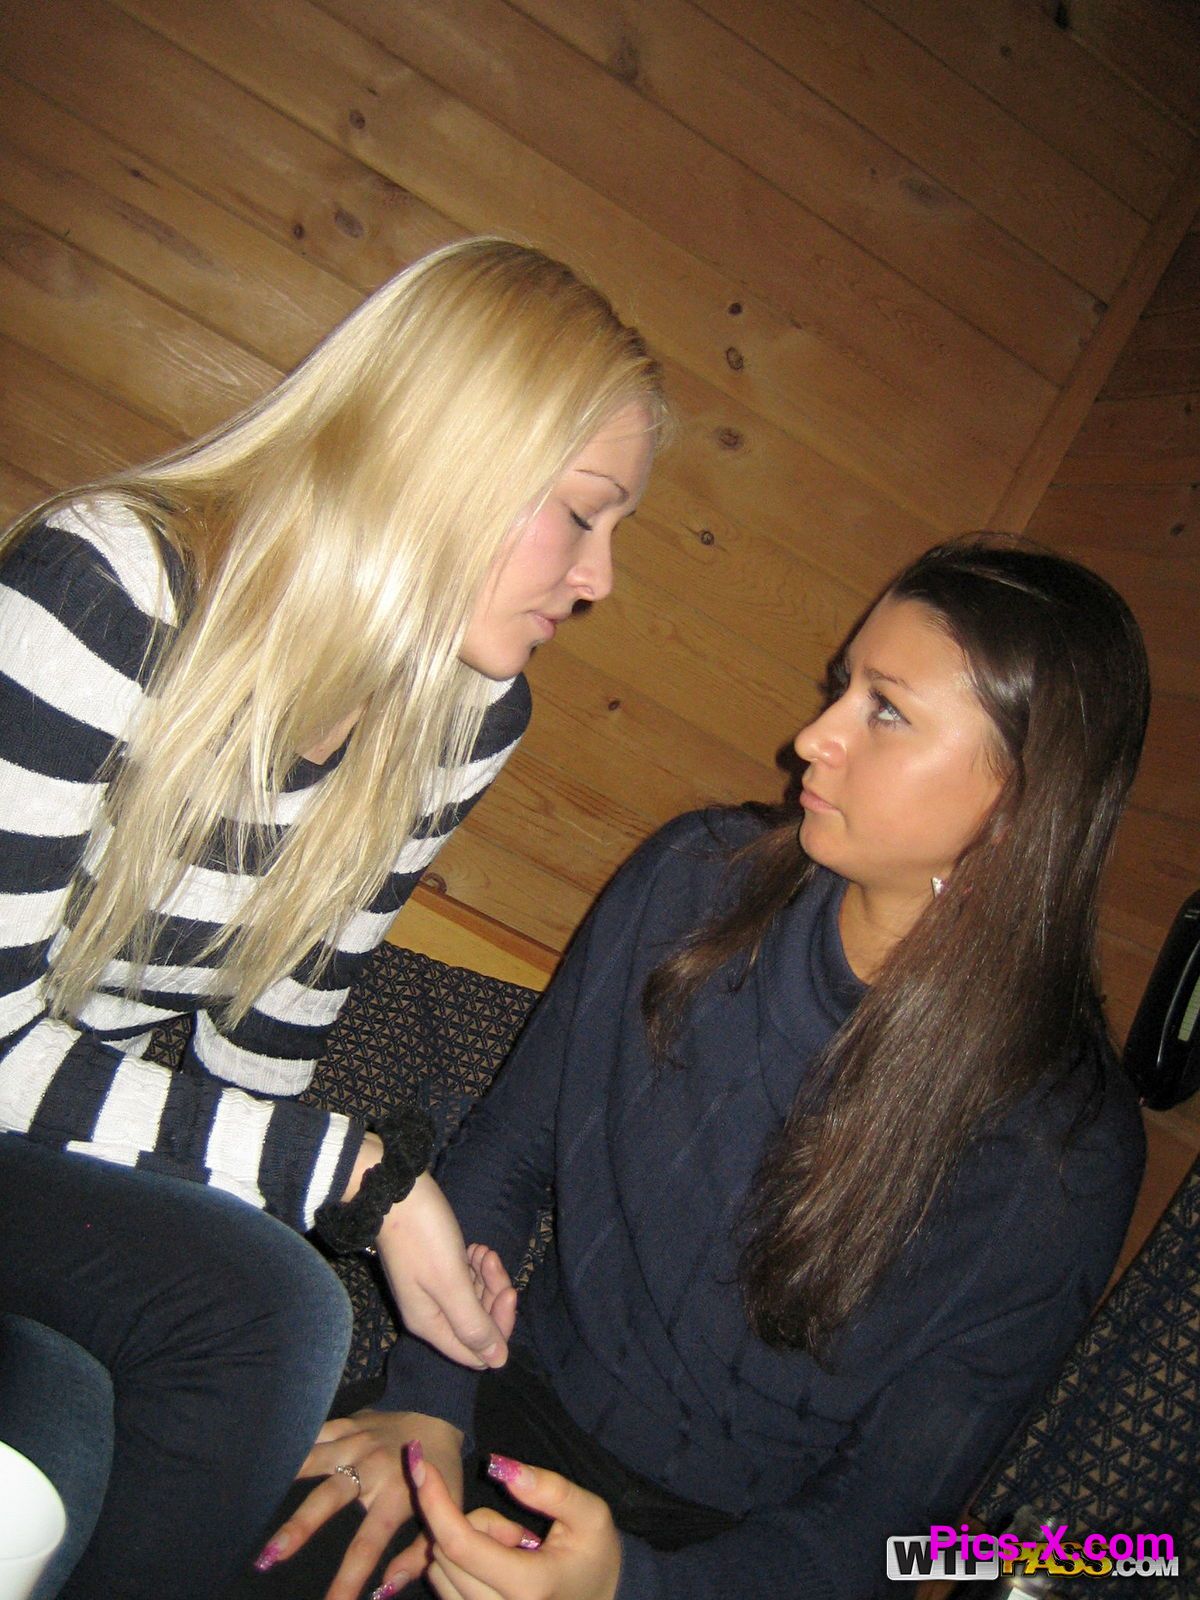 Cottage party with nasty college chicks, part 4 - College Fuck Parties - Image 47